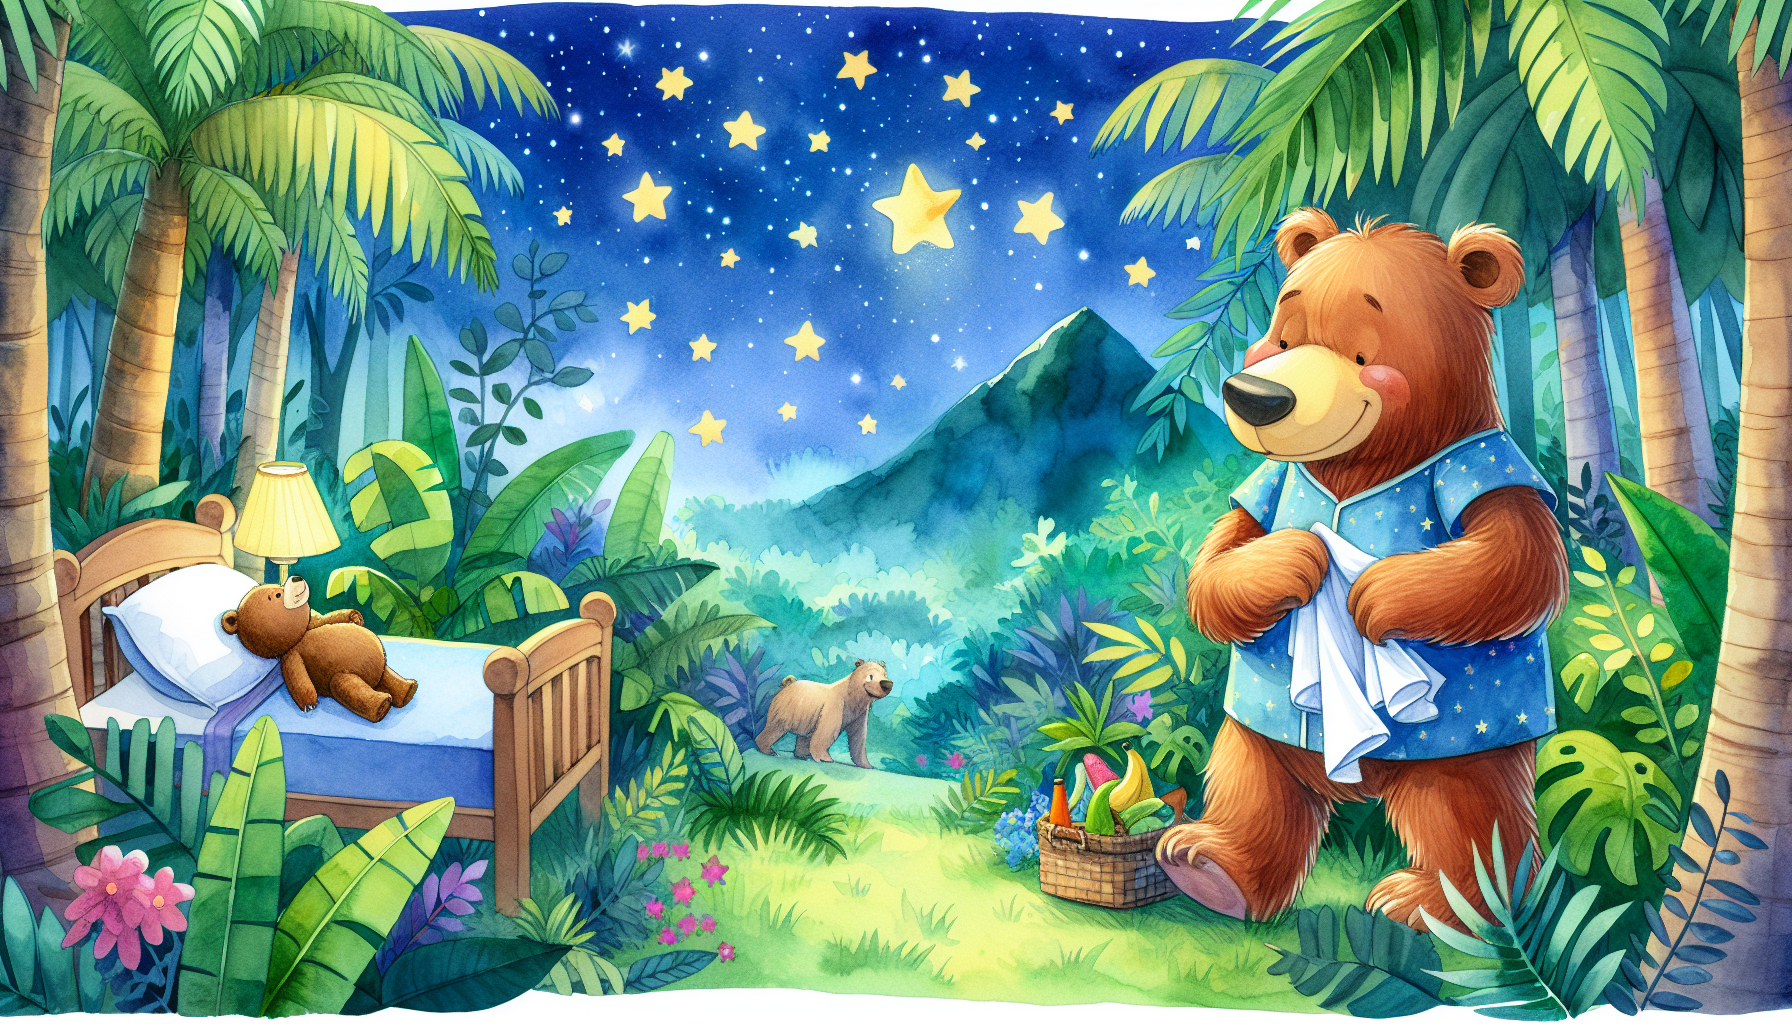 The Bedtime Bear and the Starry Sky Adventure